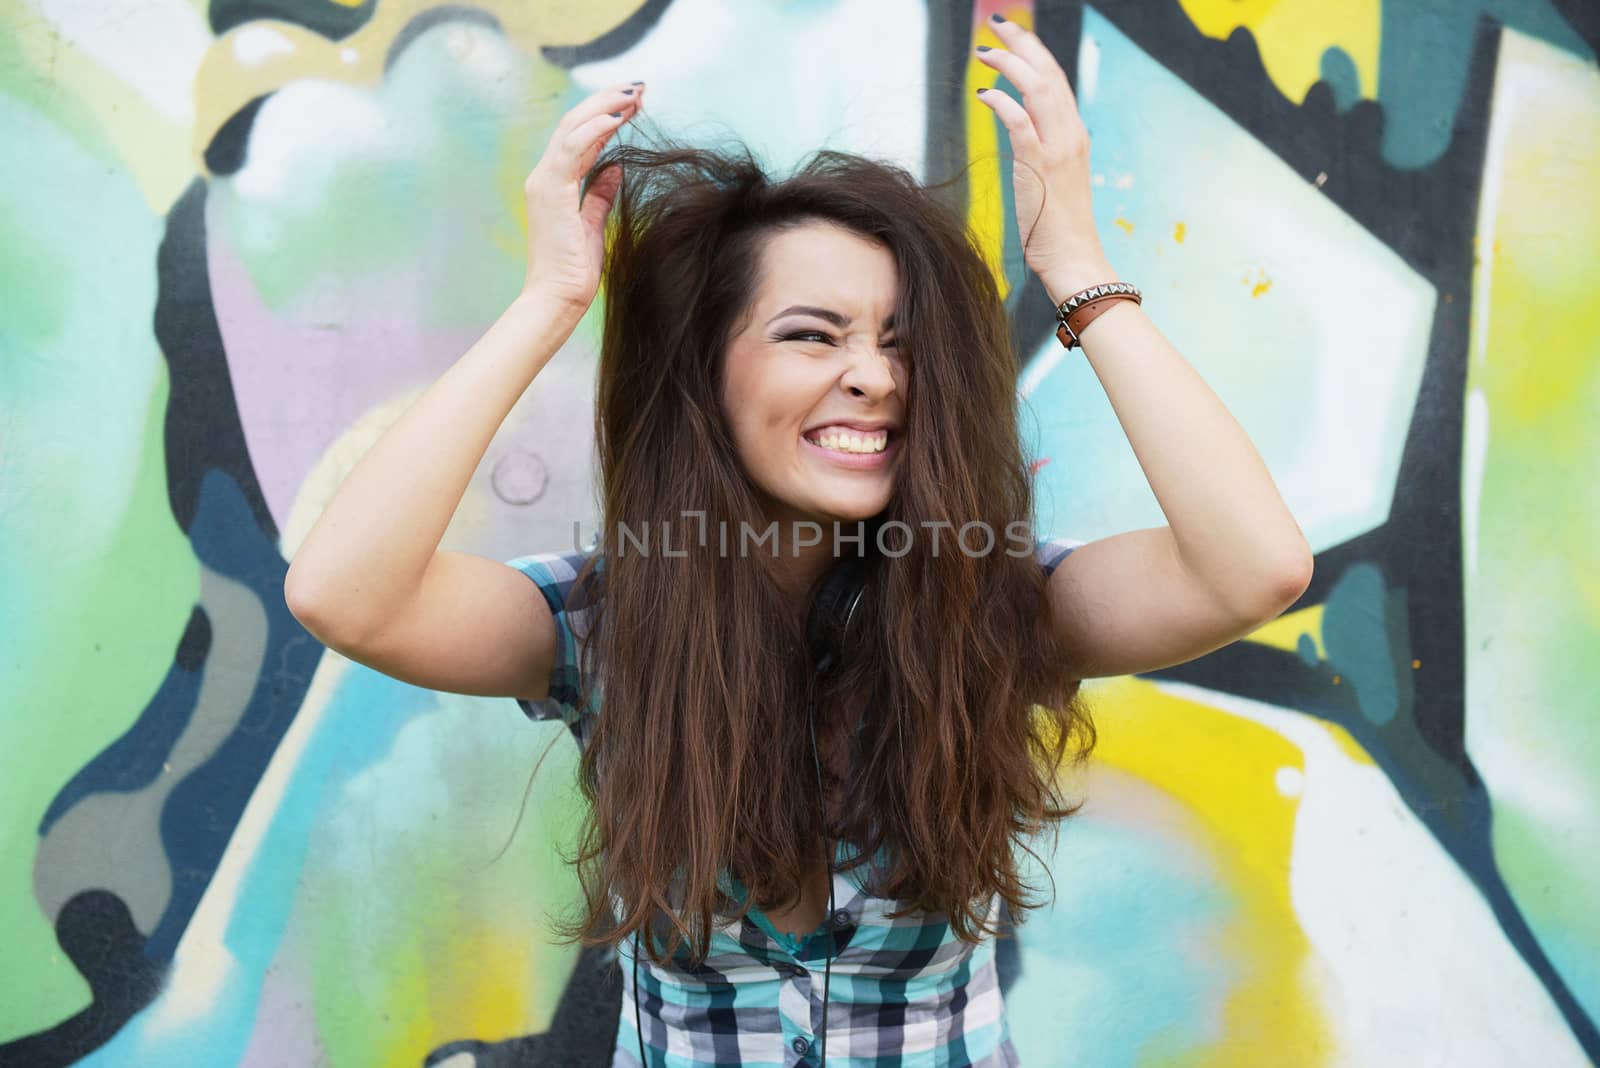 Portrait of young woman sitting at graffiti wall by shesaysboo